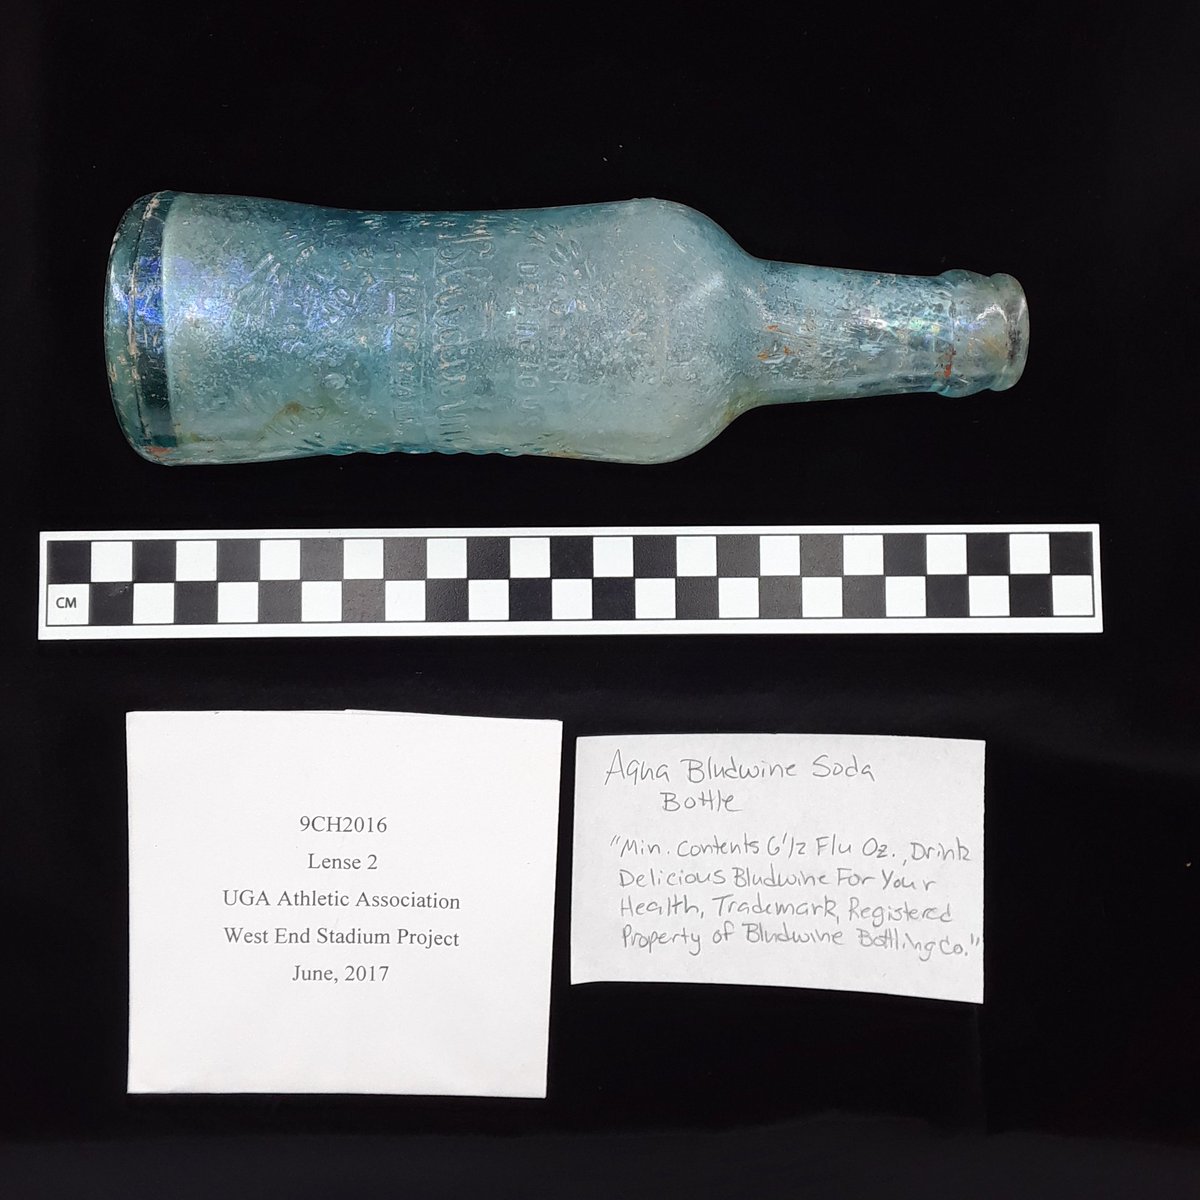 During the West End reno, #UGA archaeologists found a bottle of Budwine from the early 20th century during renovations of #SanfordStadium🏟️

This soda was originally marketed as Bludwine by local teetotaler Henry C. Anderson in 1906 and made until the mid-1990s🥤@HistoricAthens